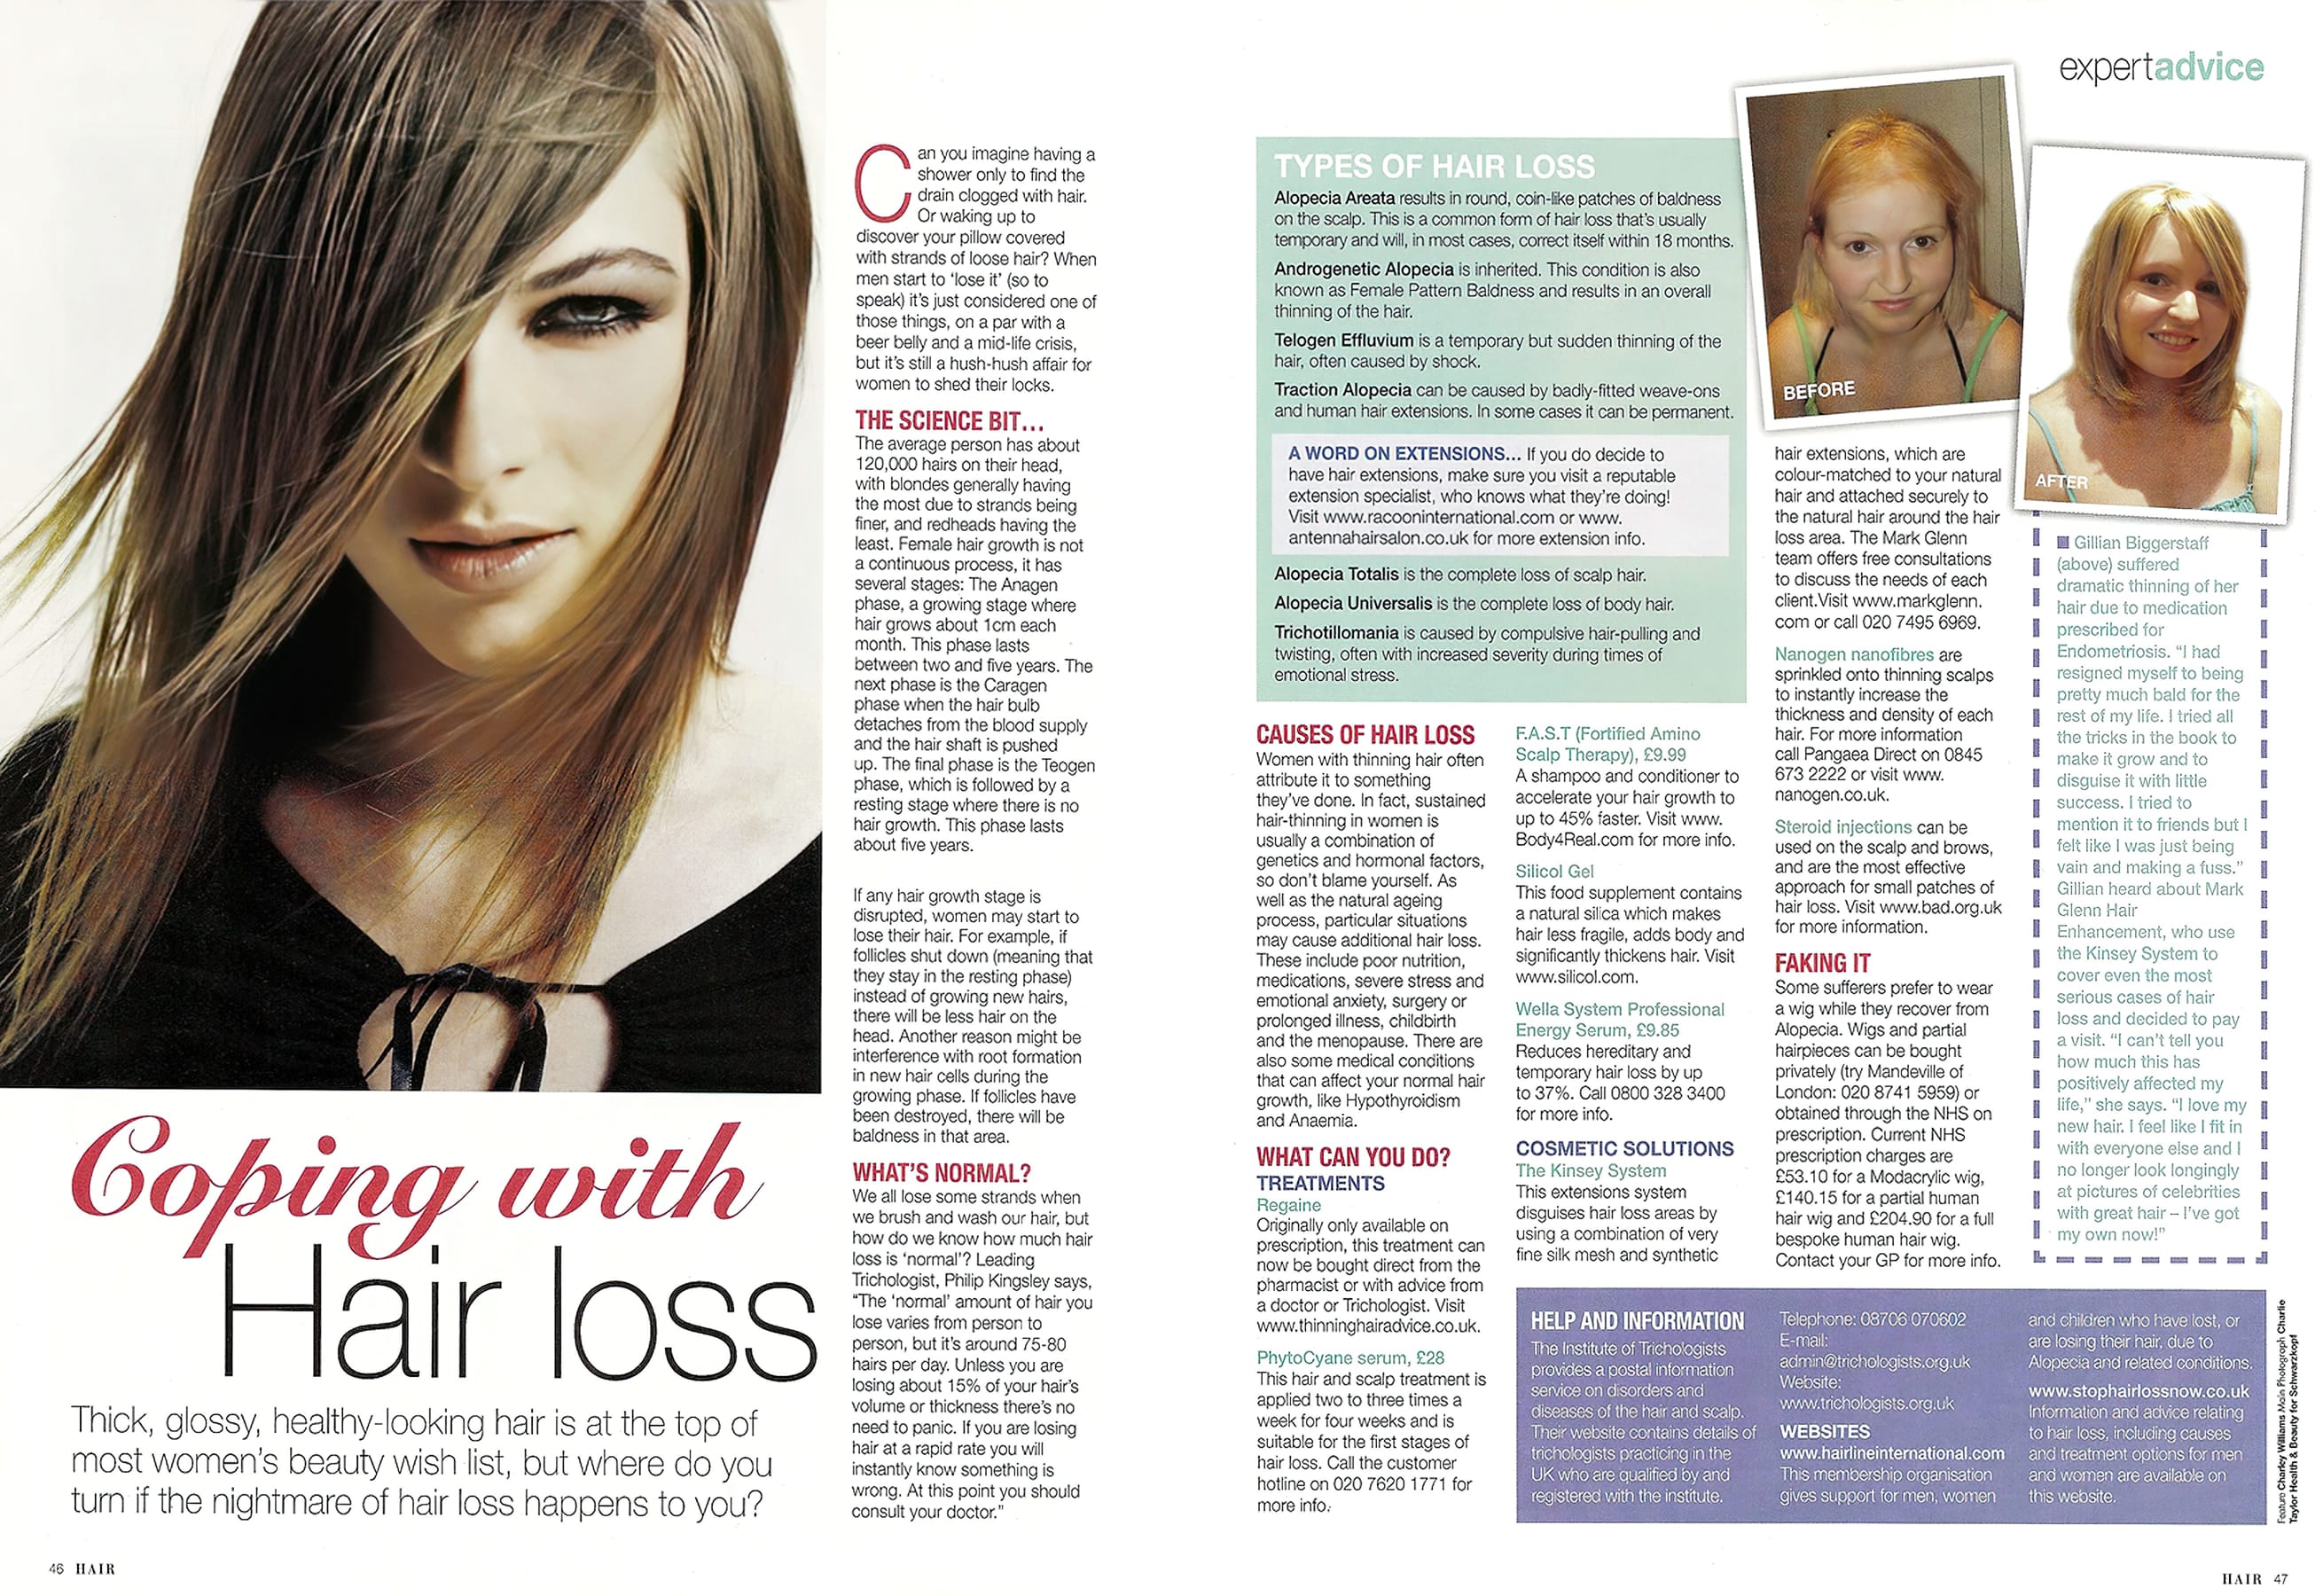 Hair Magazine - 'Coping with female hair loss